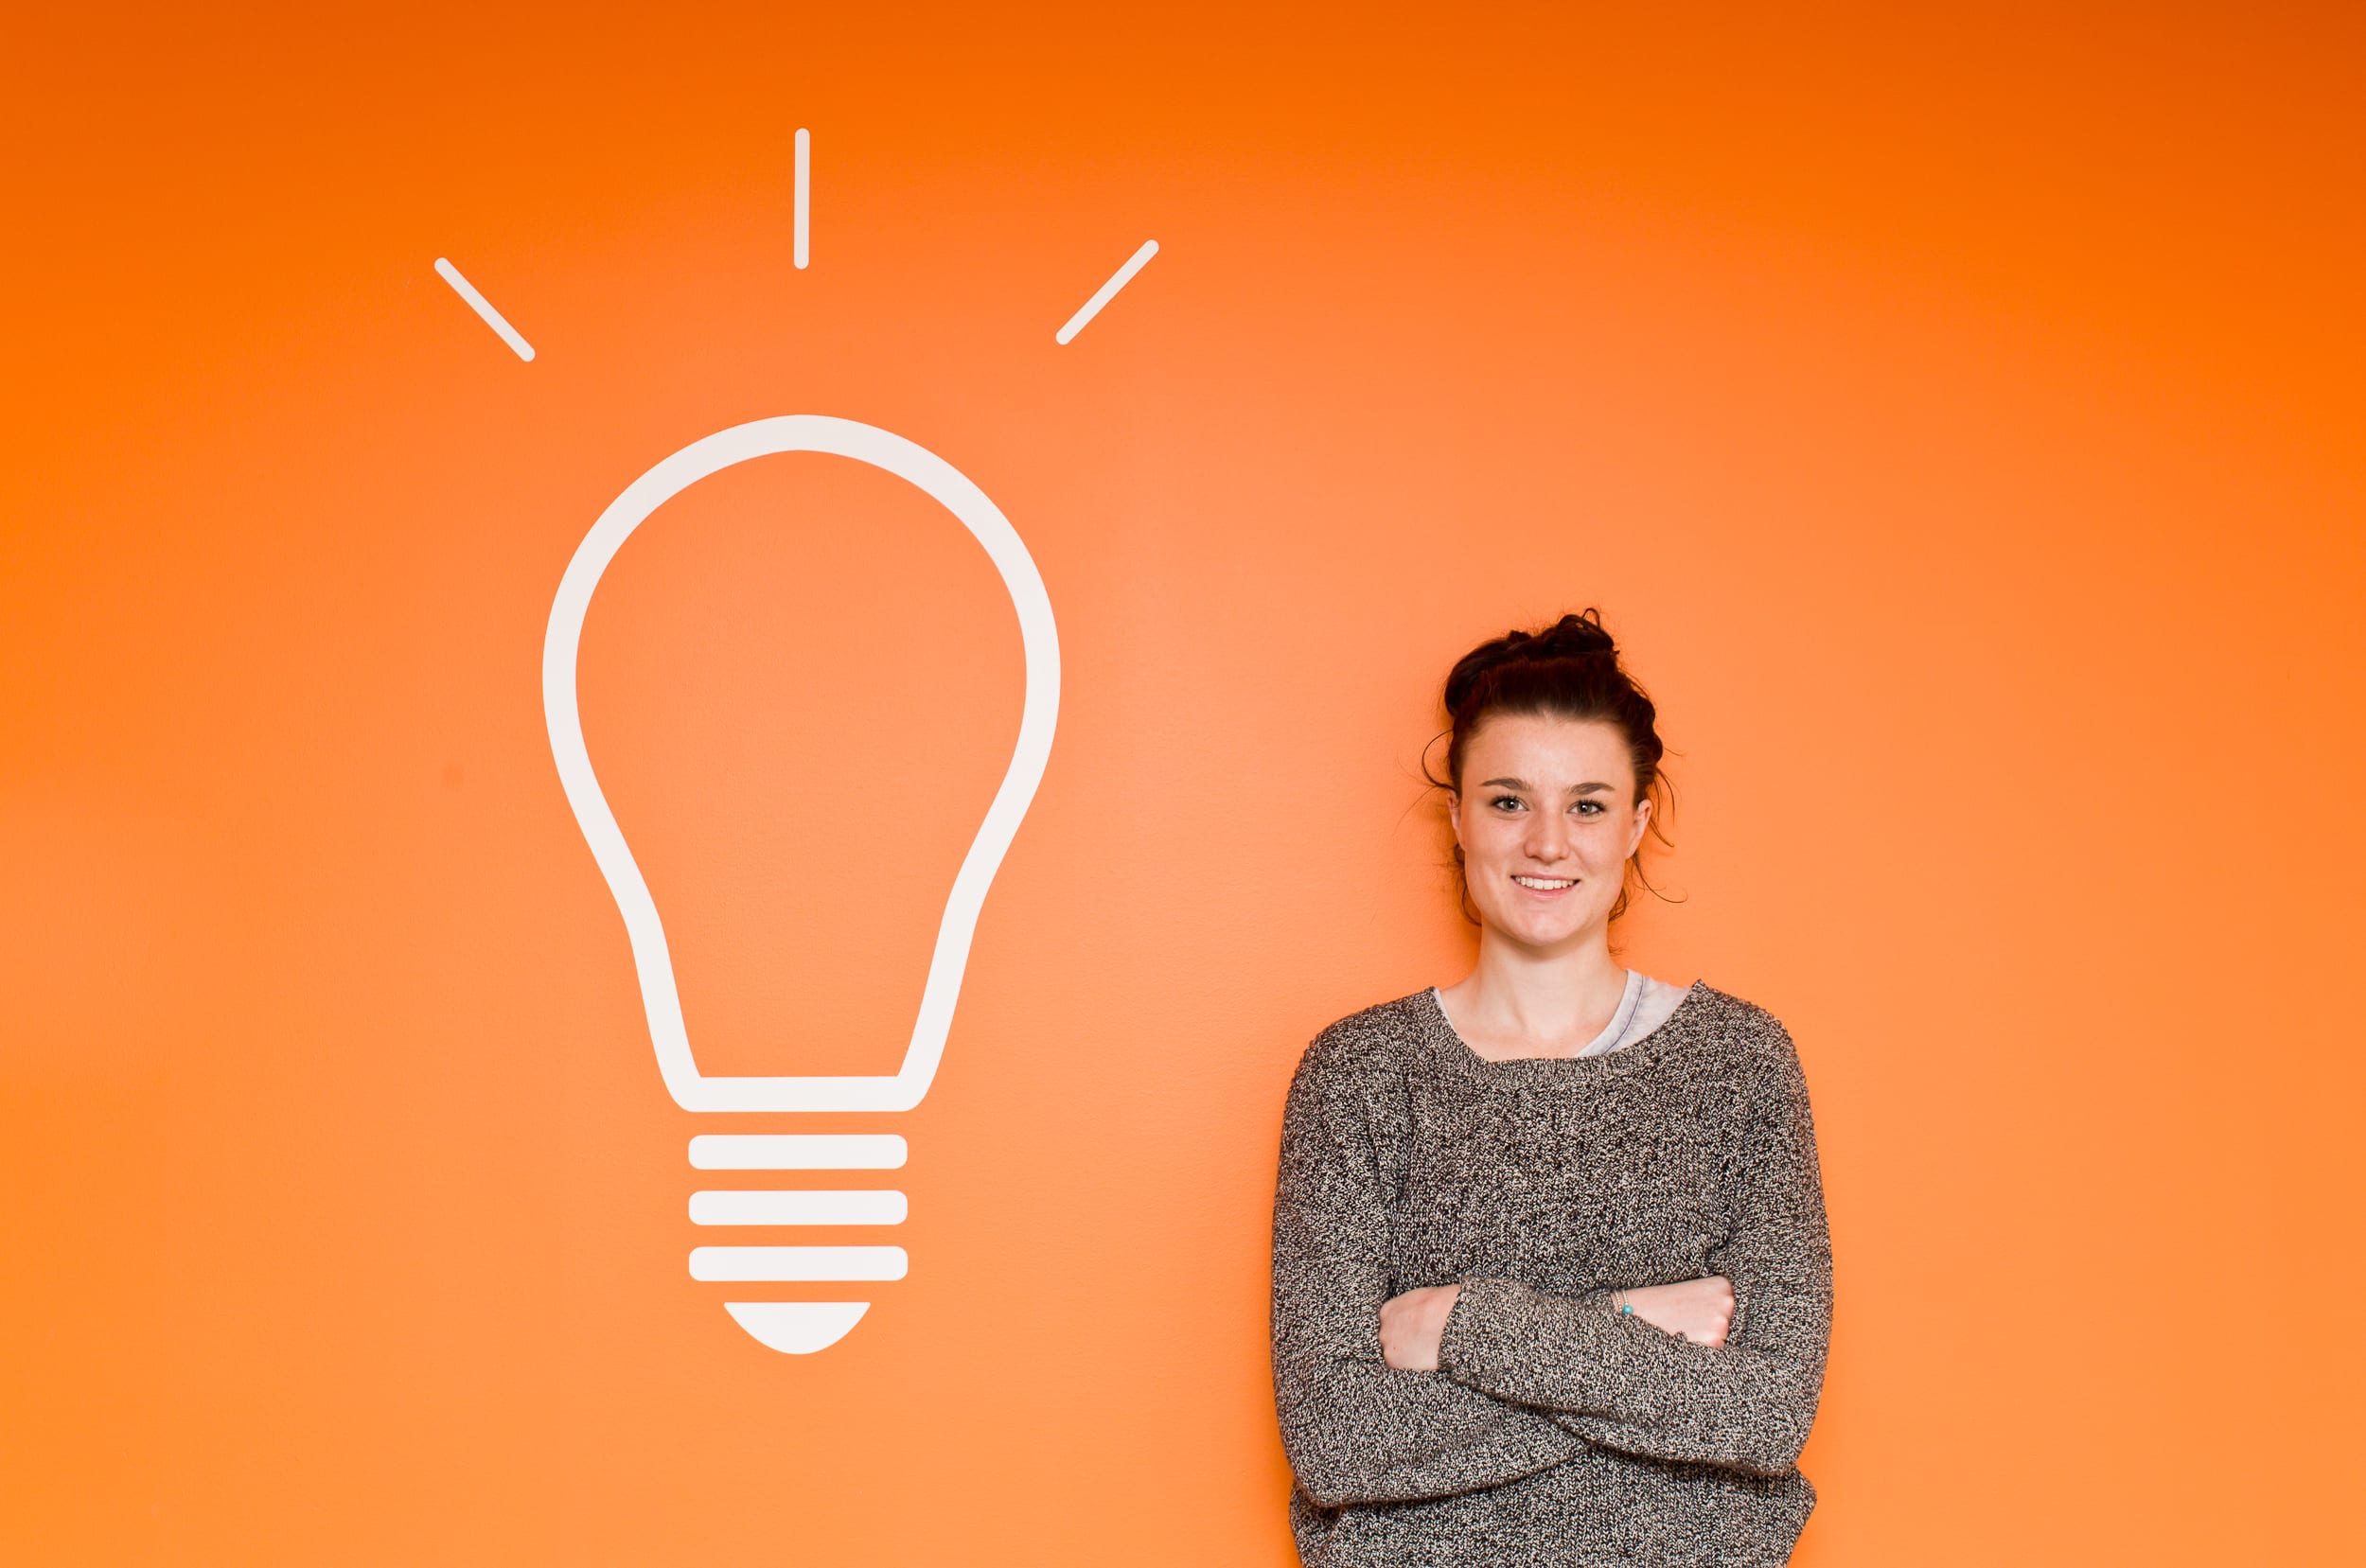 student next to bright orange wall with lightbulb image